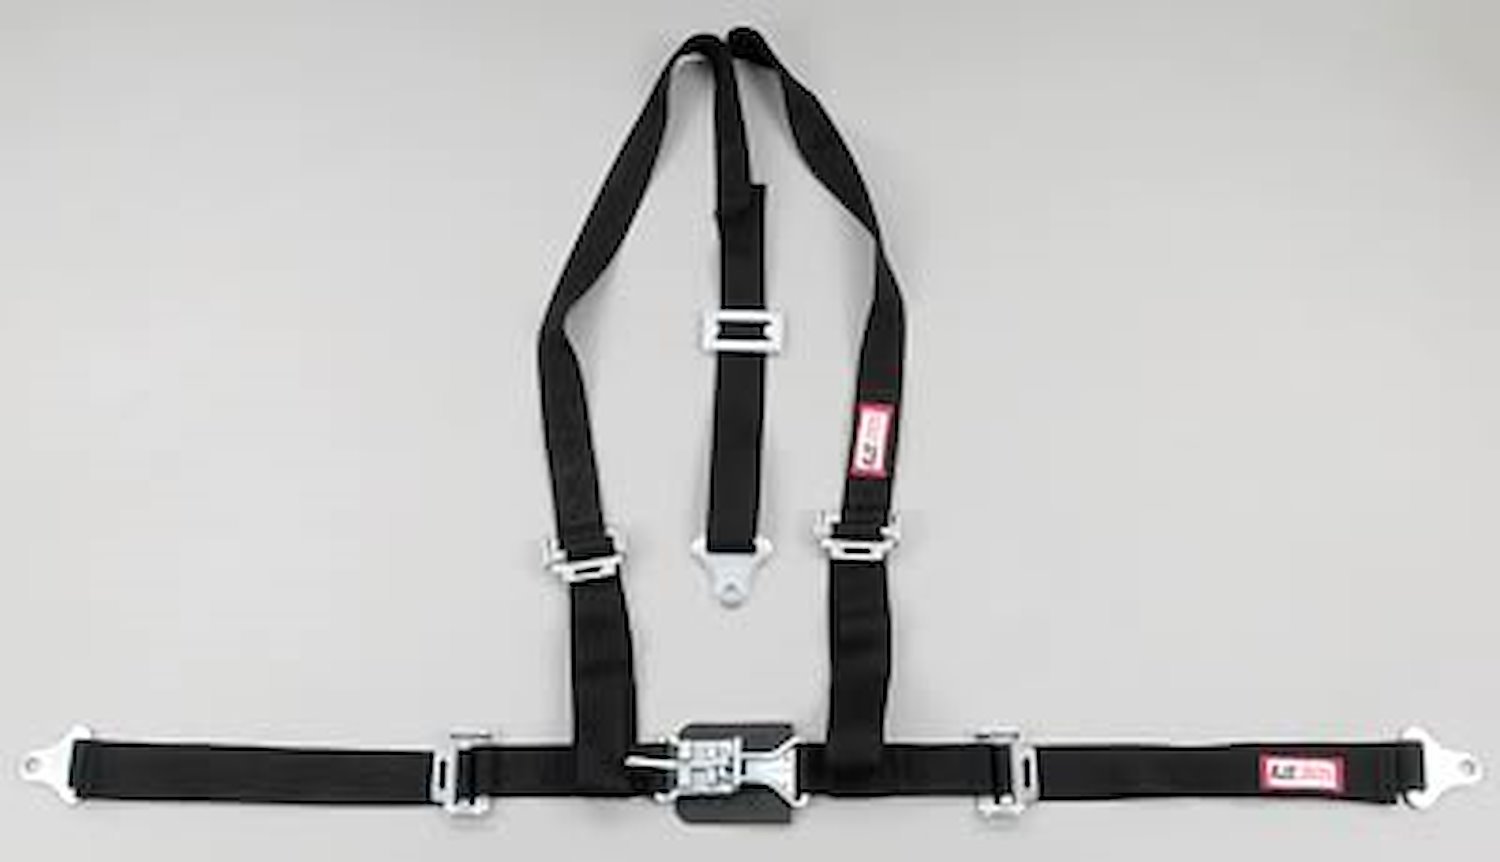 NON-SFI L&L HARNESS 2 PULL UP Lap Belt w/adjuster 2 S.H. V ROLL BAR MOUNT w/STERNUM STRAP ALL SNAP ENDS GRAY